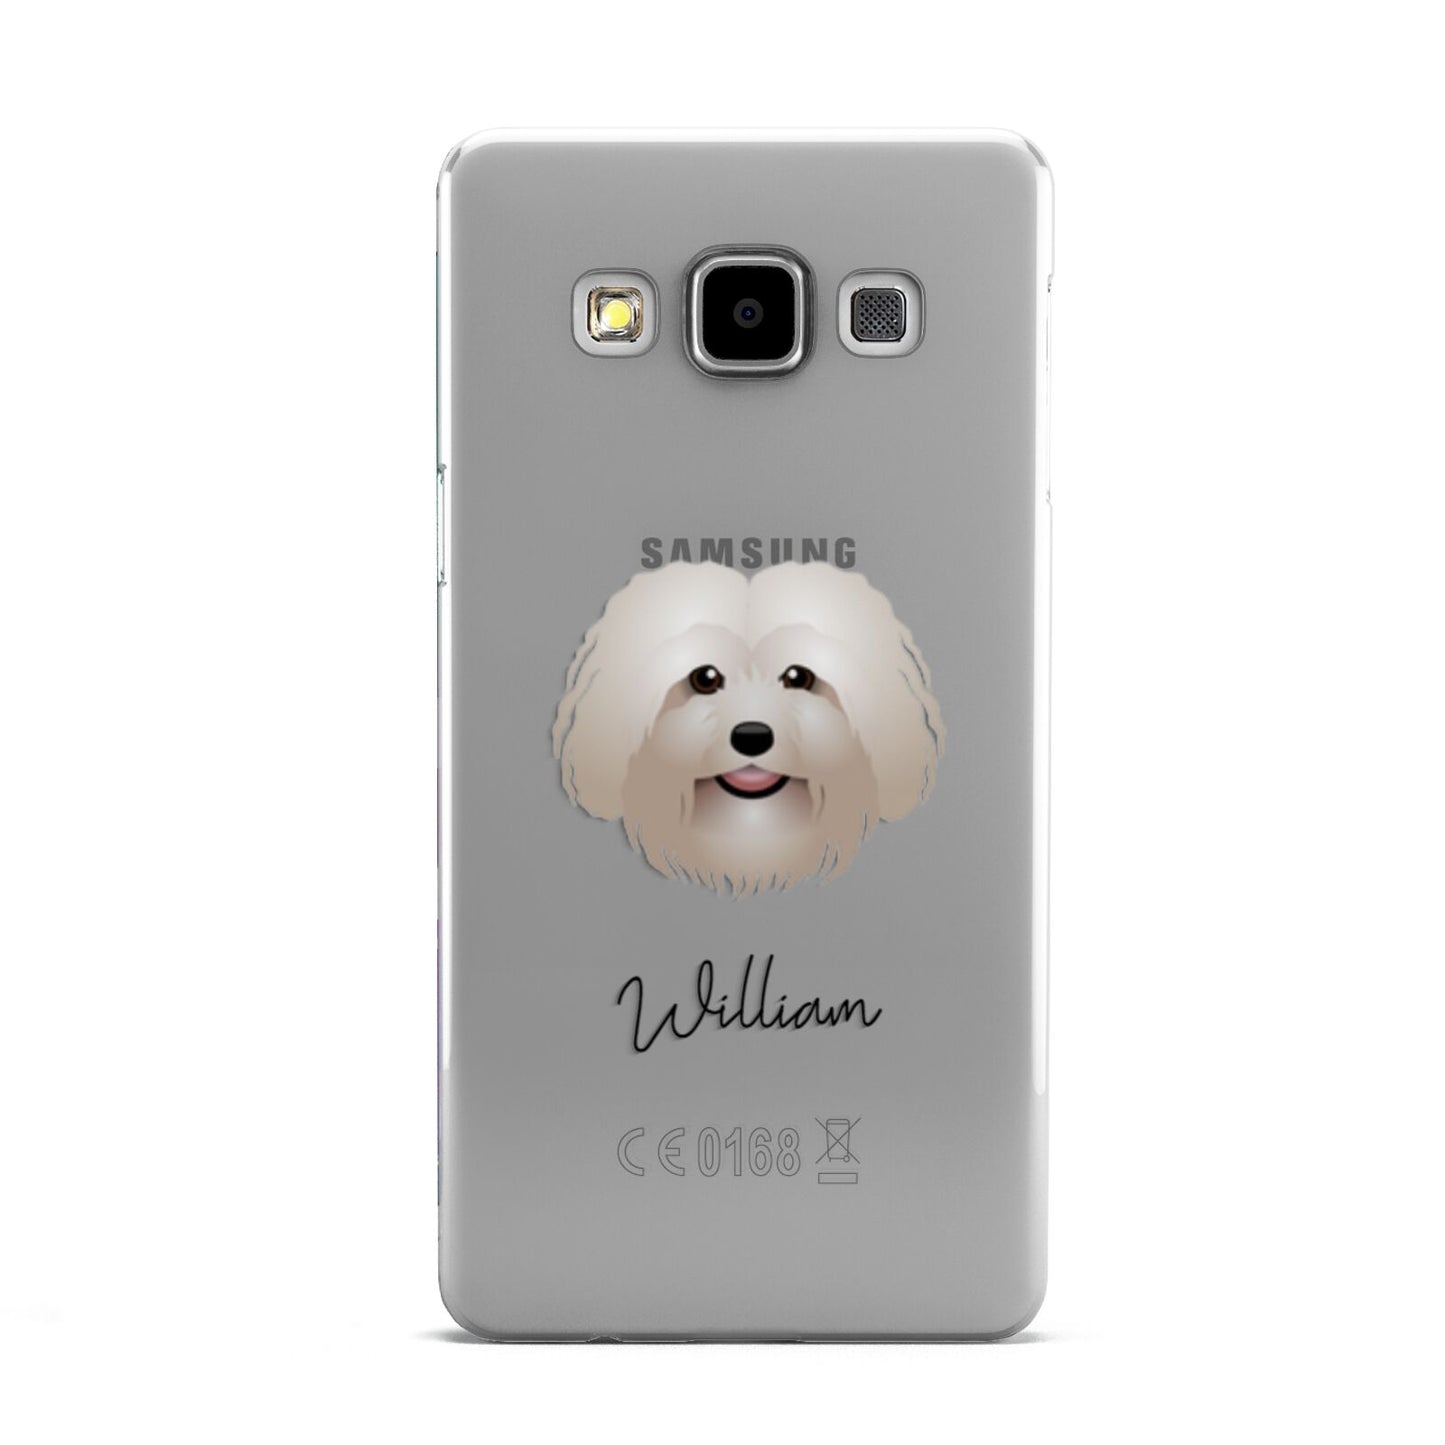 Bolognese Personalised Samsung Galaxy A5 Case